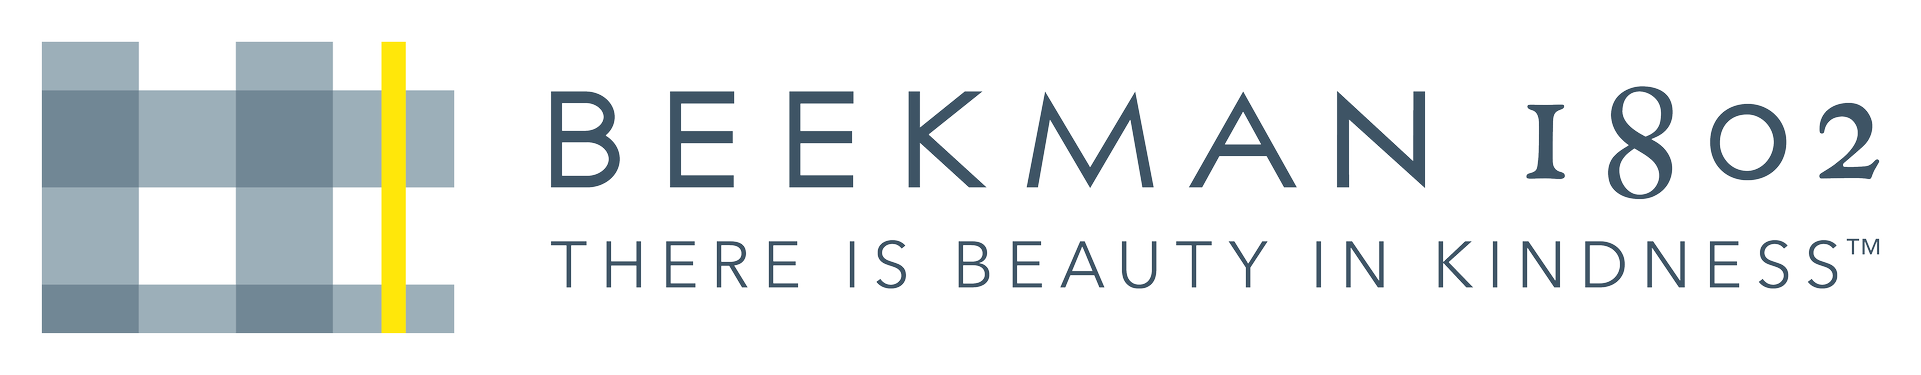 Beekman 1802  There Is Beauty In Kindness